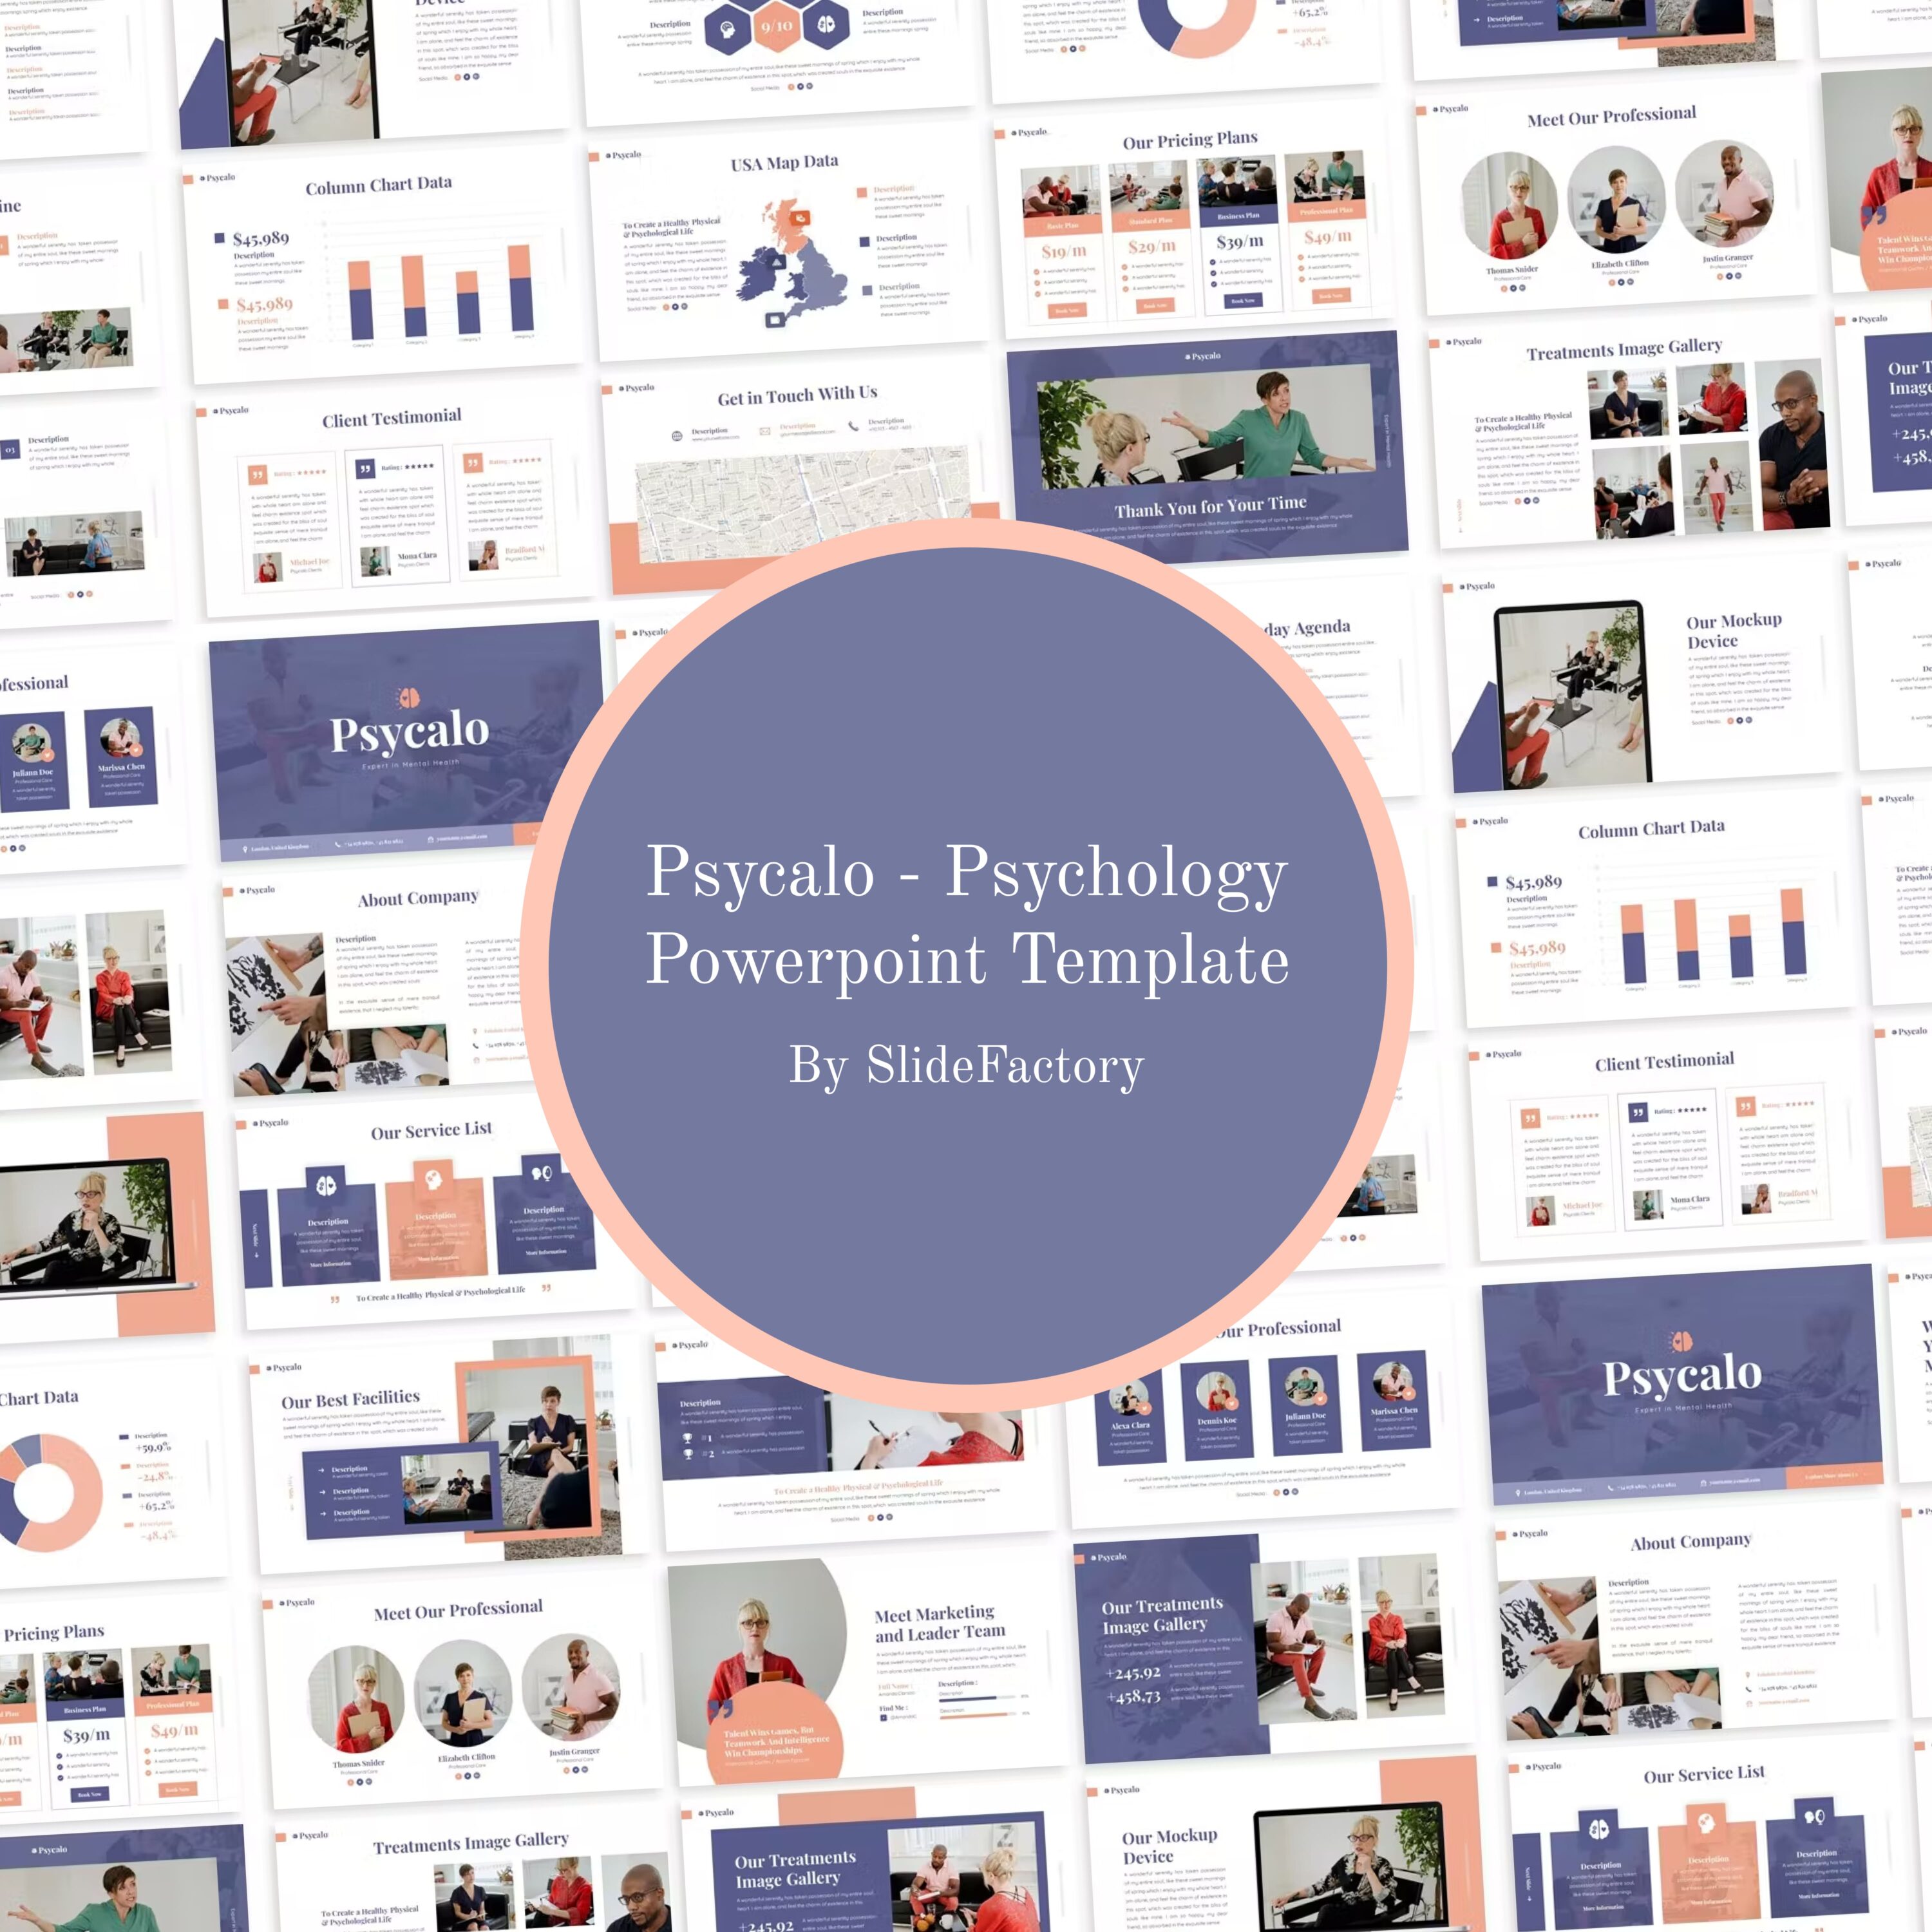 Psycalo psychology powerpoint template cover.